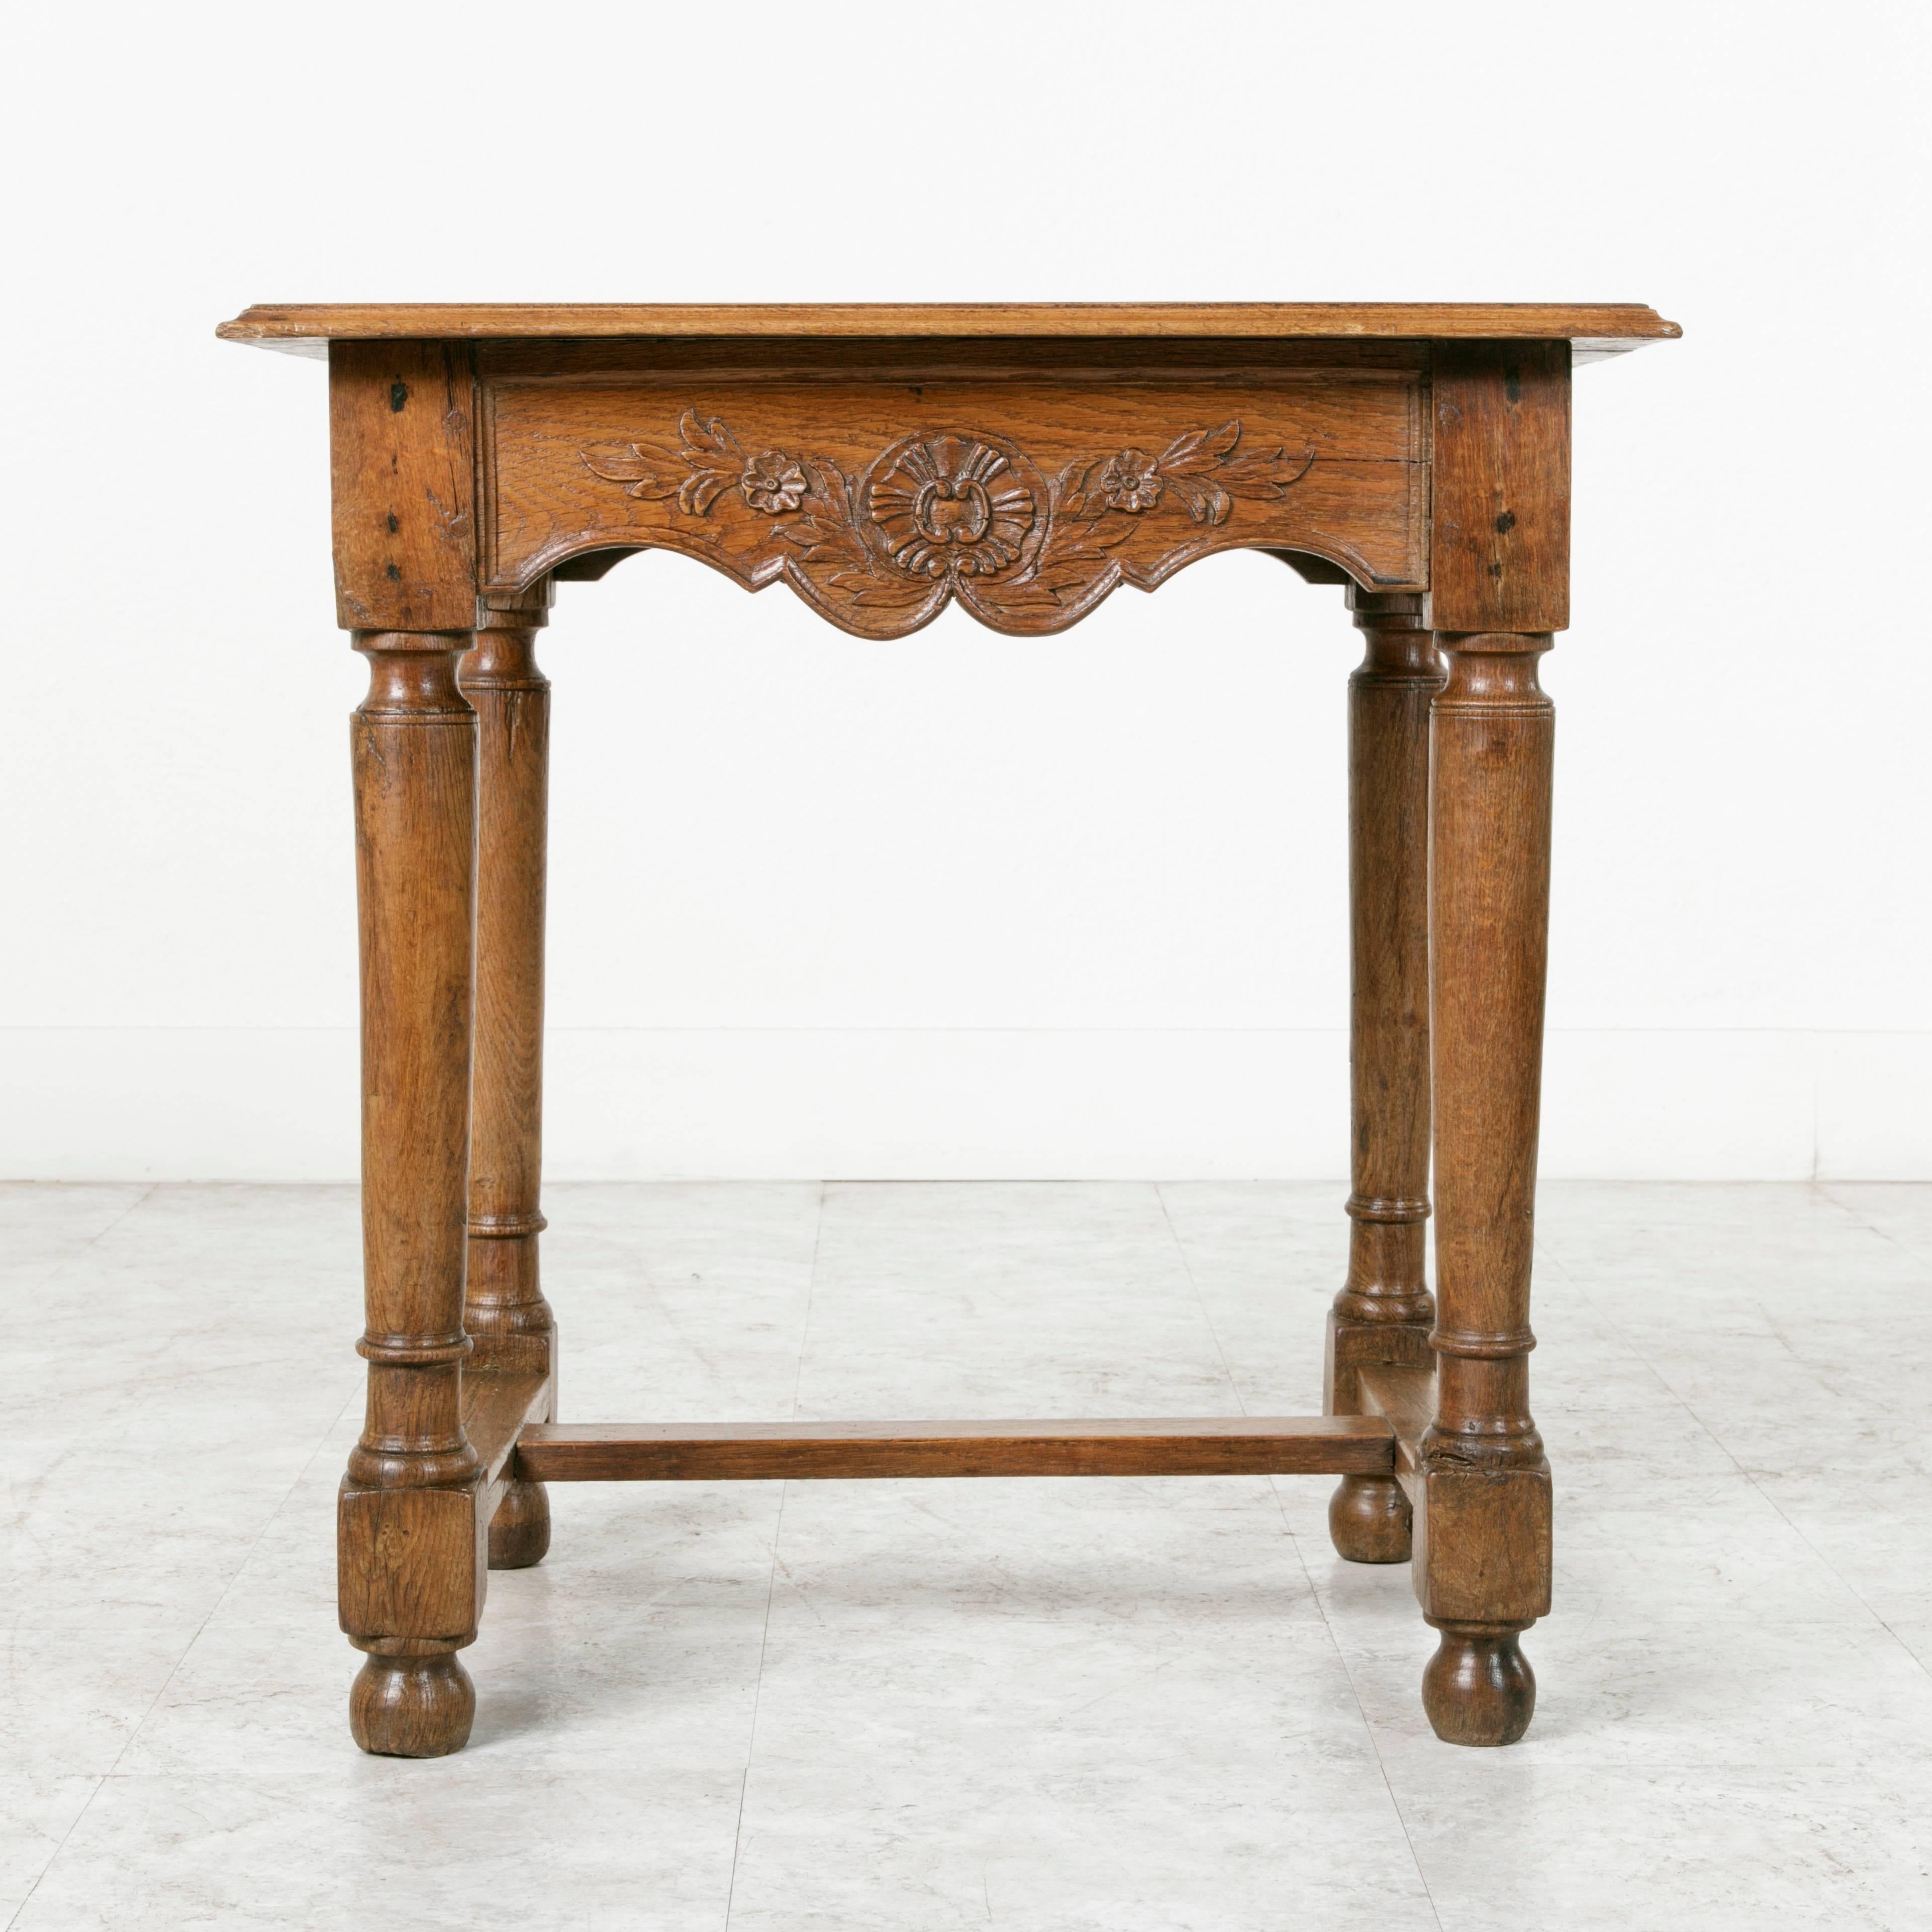 Originally from the Haute-Saone region of France, near the Swiss and German borders, this late 19th century oak side table features hand pegged die joints and hand carvings on all four sides. Each side's carvings include a central cartouche flanked